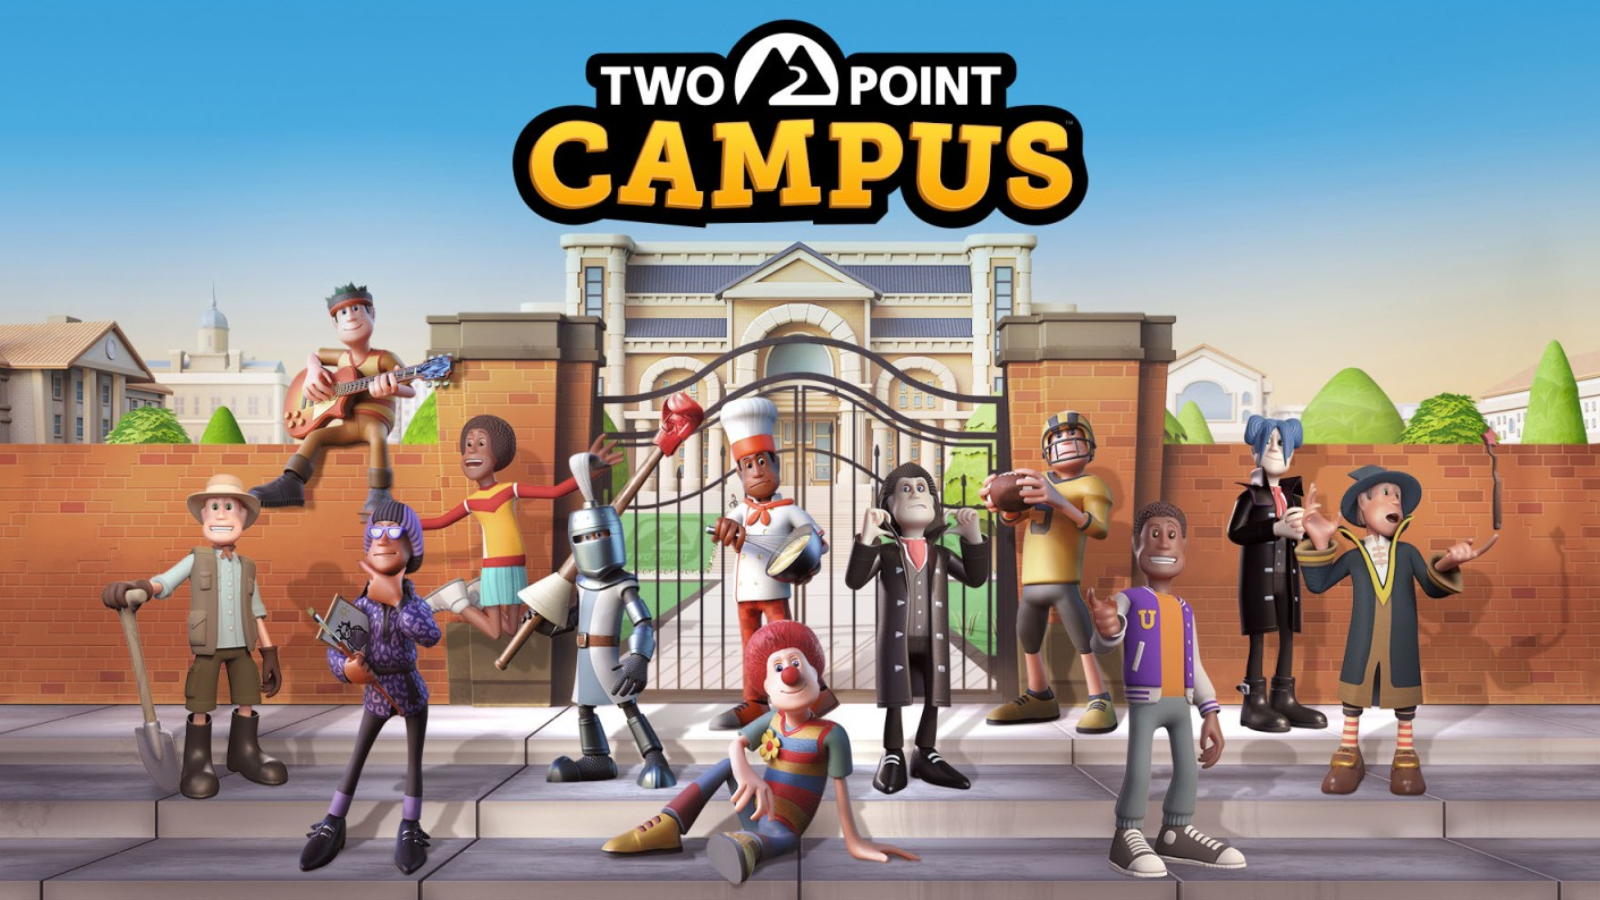 two-point-campus-is-two-weeks-old-and-already-has-a-million-players